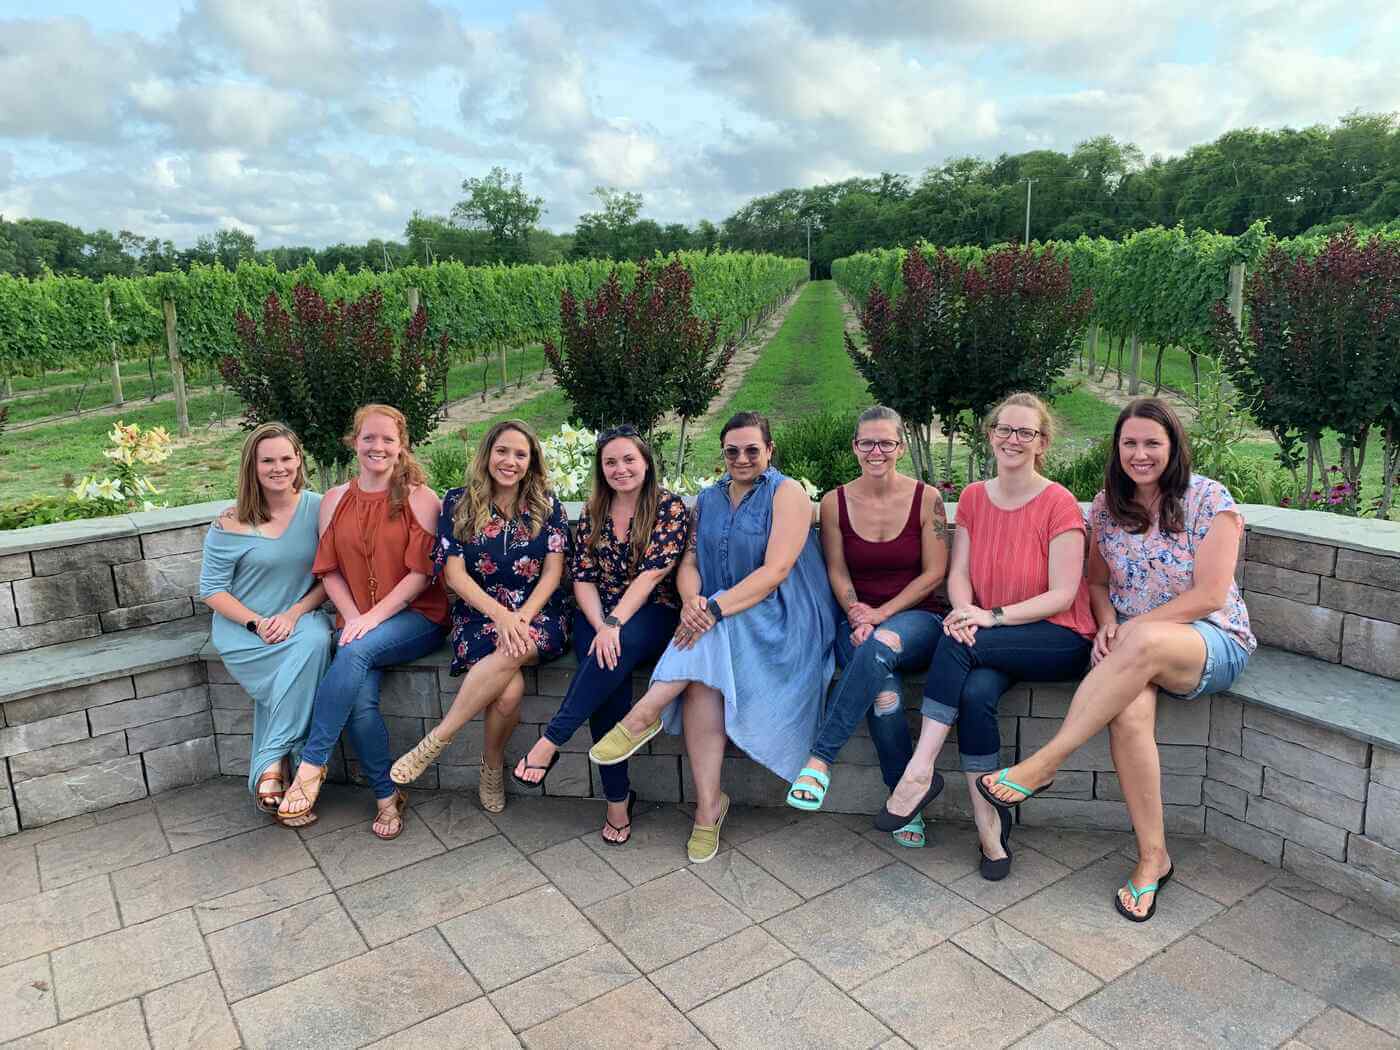 Members of the Jersey Cape Military Spouses Club at Willow Creek Winery. From left to right: Mary Barsness